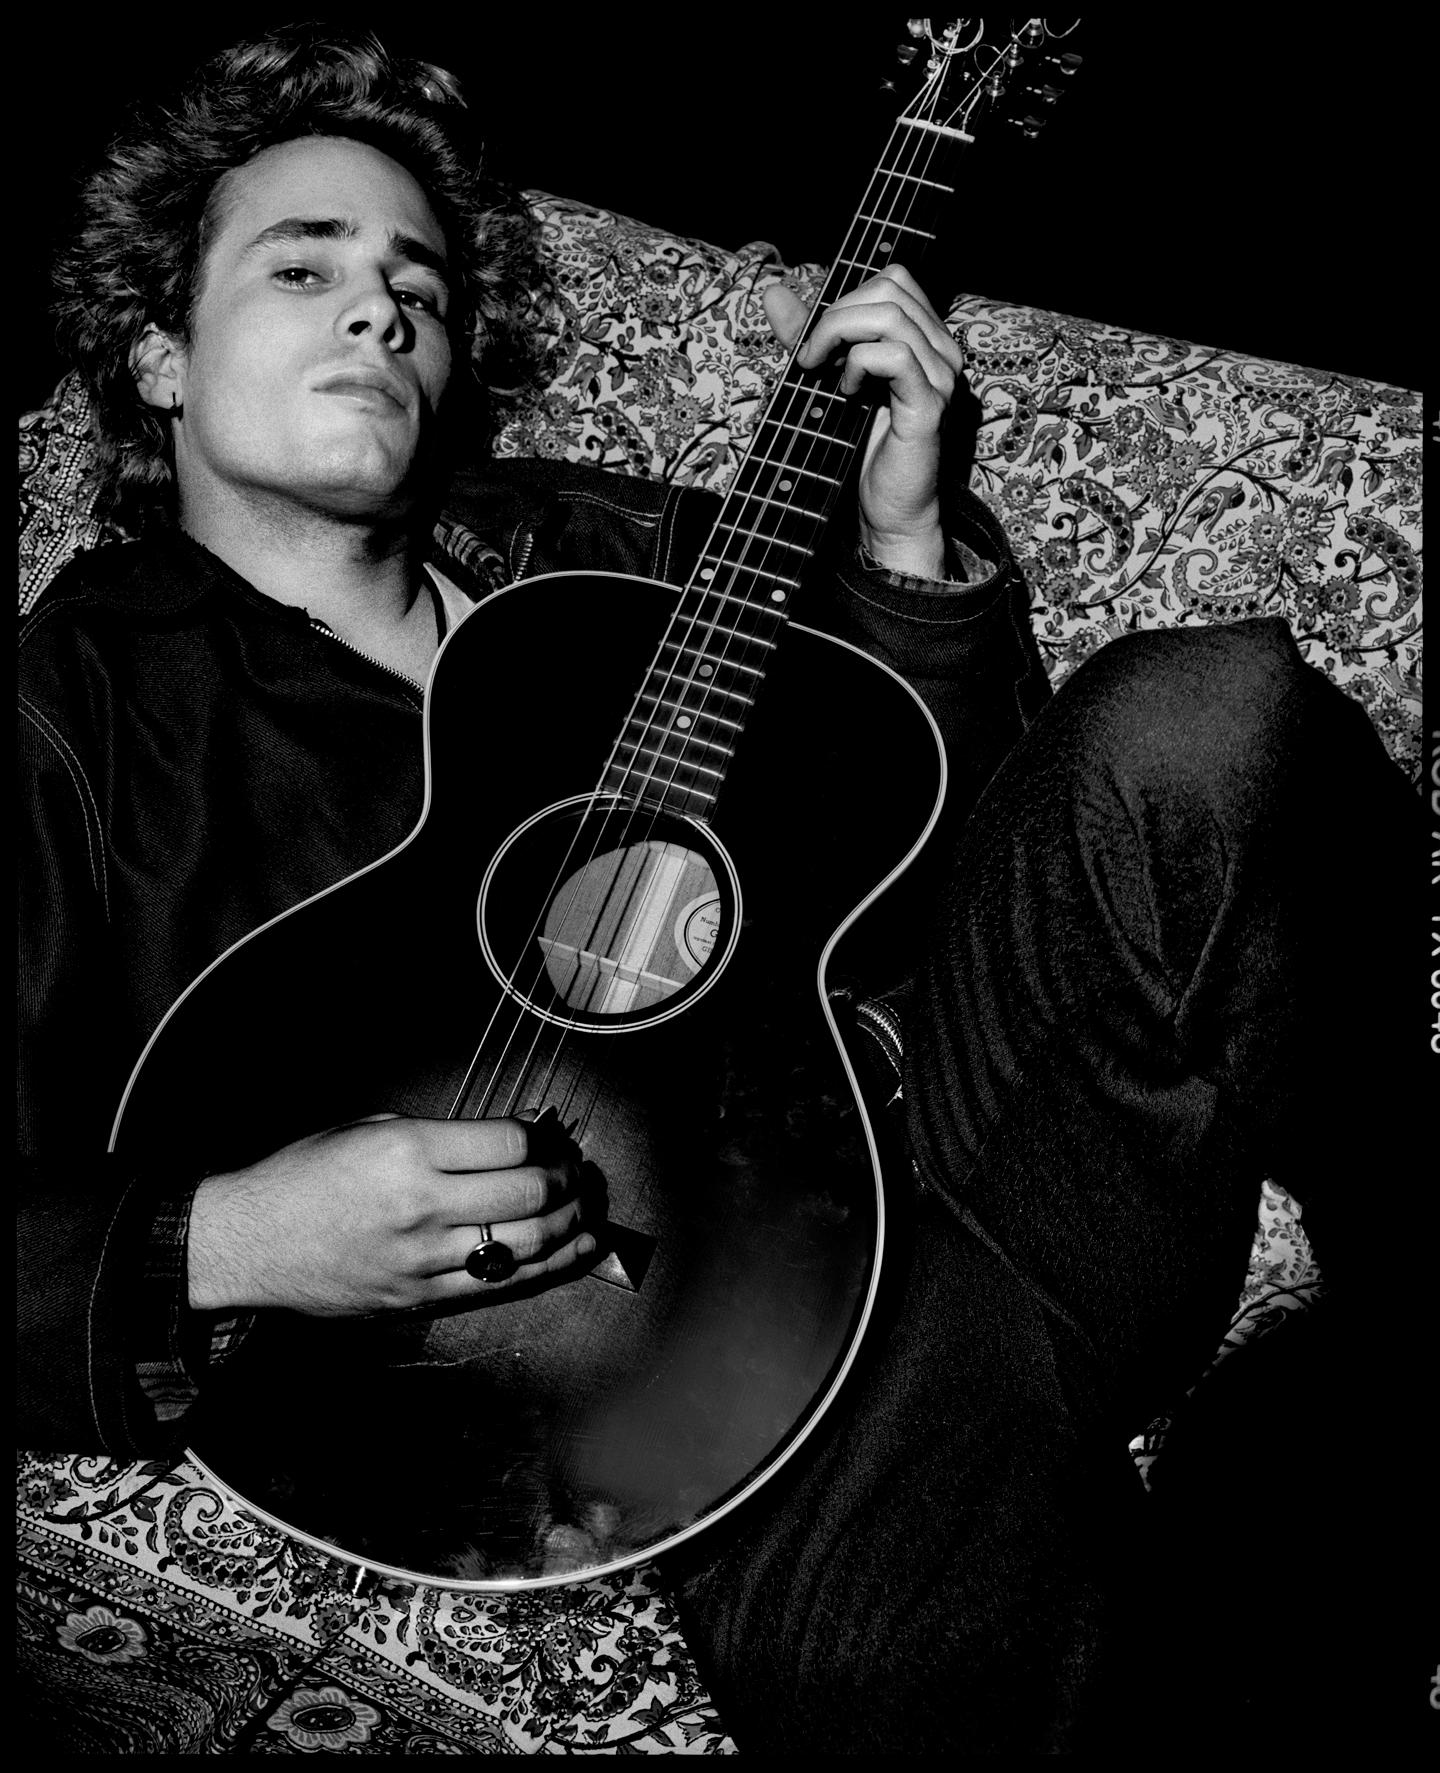 Jeff Buckley 

1994

by Kevin Westenberg
Signed Limited Edition

Kevin Westenberg is famed for his creation of provocative and electrifying images of world-class musicians, artists and movie stars for over 25 years.

His technique of lighting,